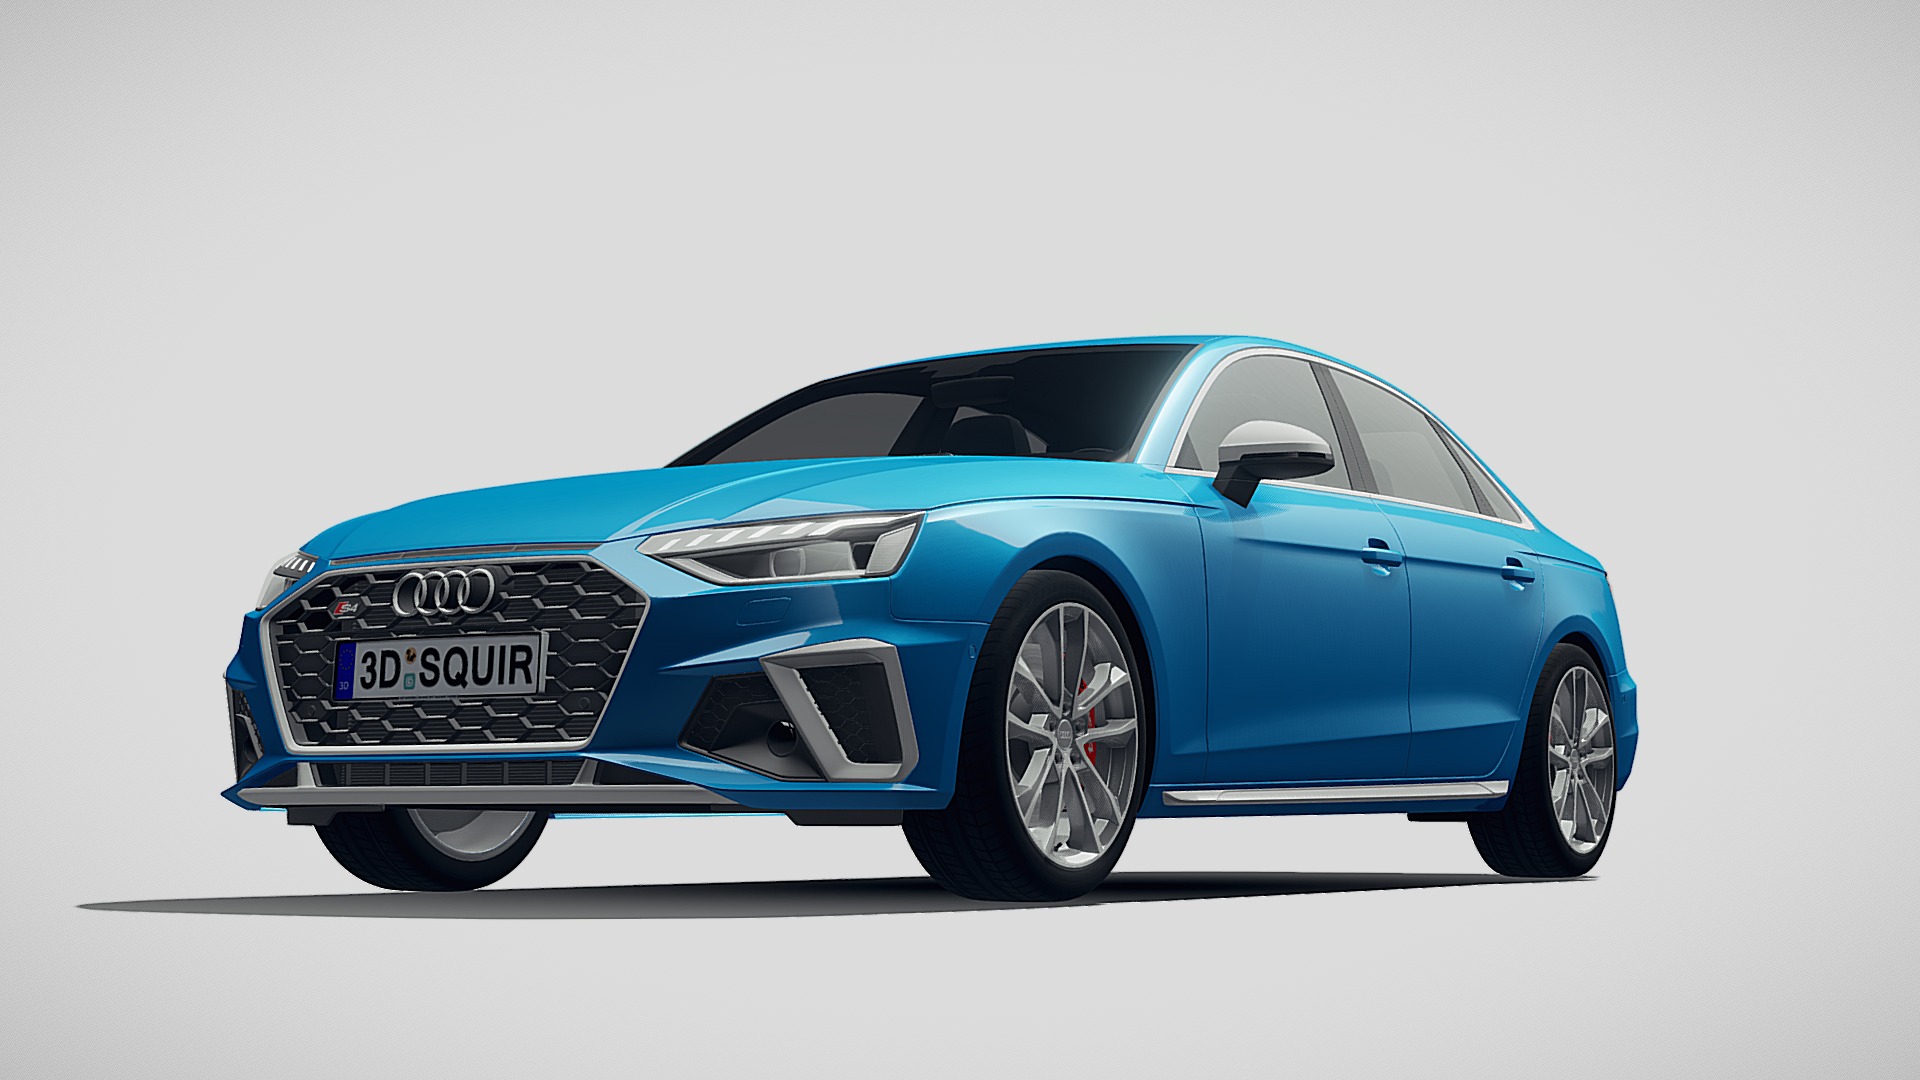 3D model Audi S4 Sedan 2020 - This is a 3D model of the Audi S4 Sedan 2020. The 3D model is about a blue car with a white background.